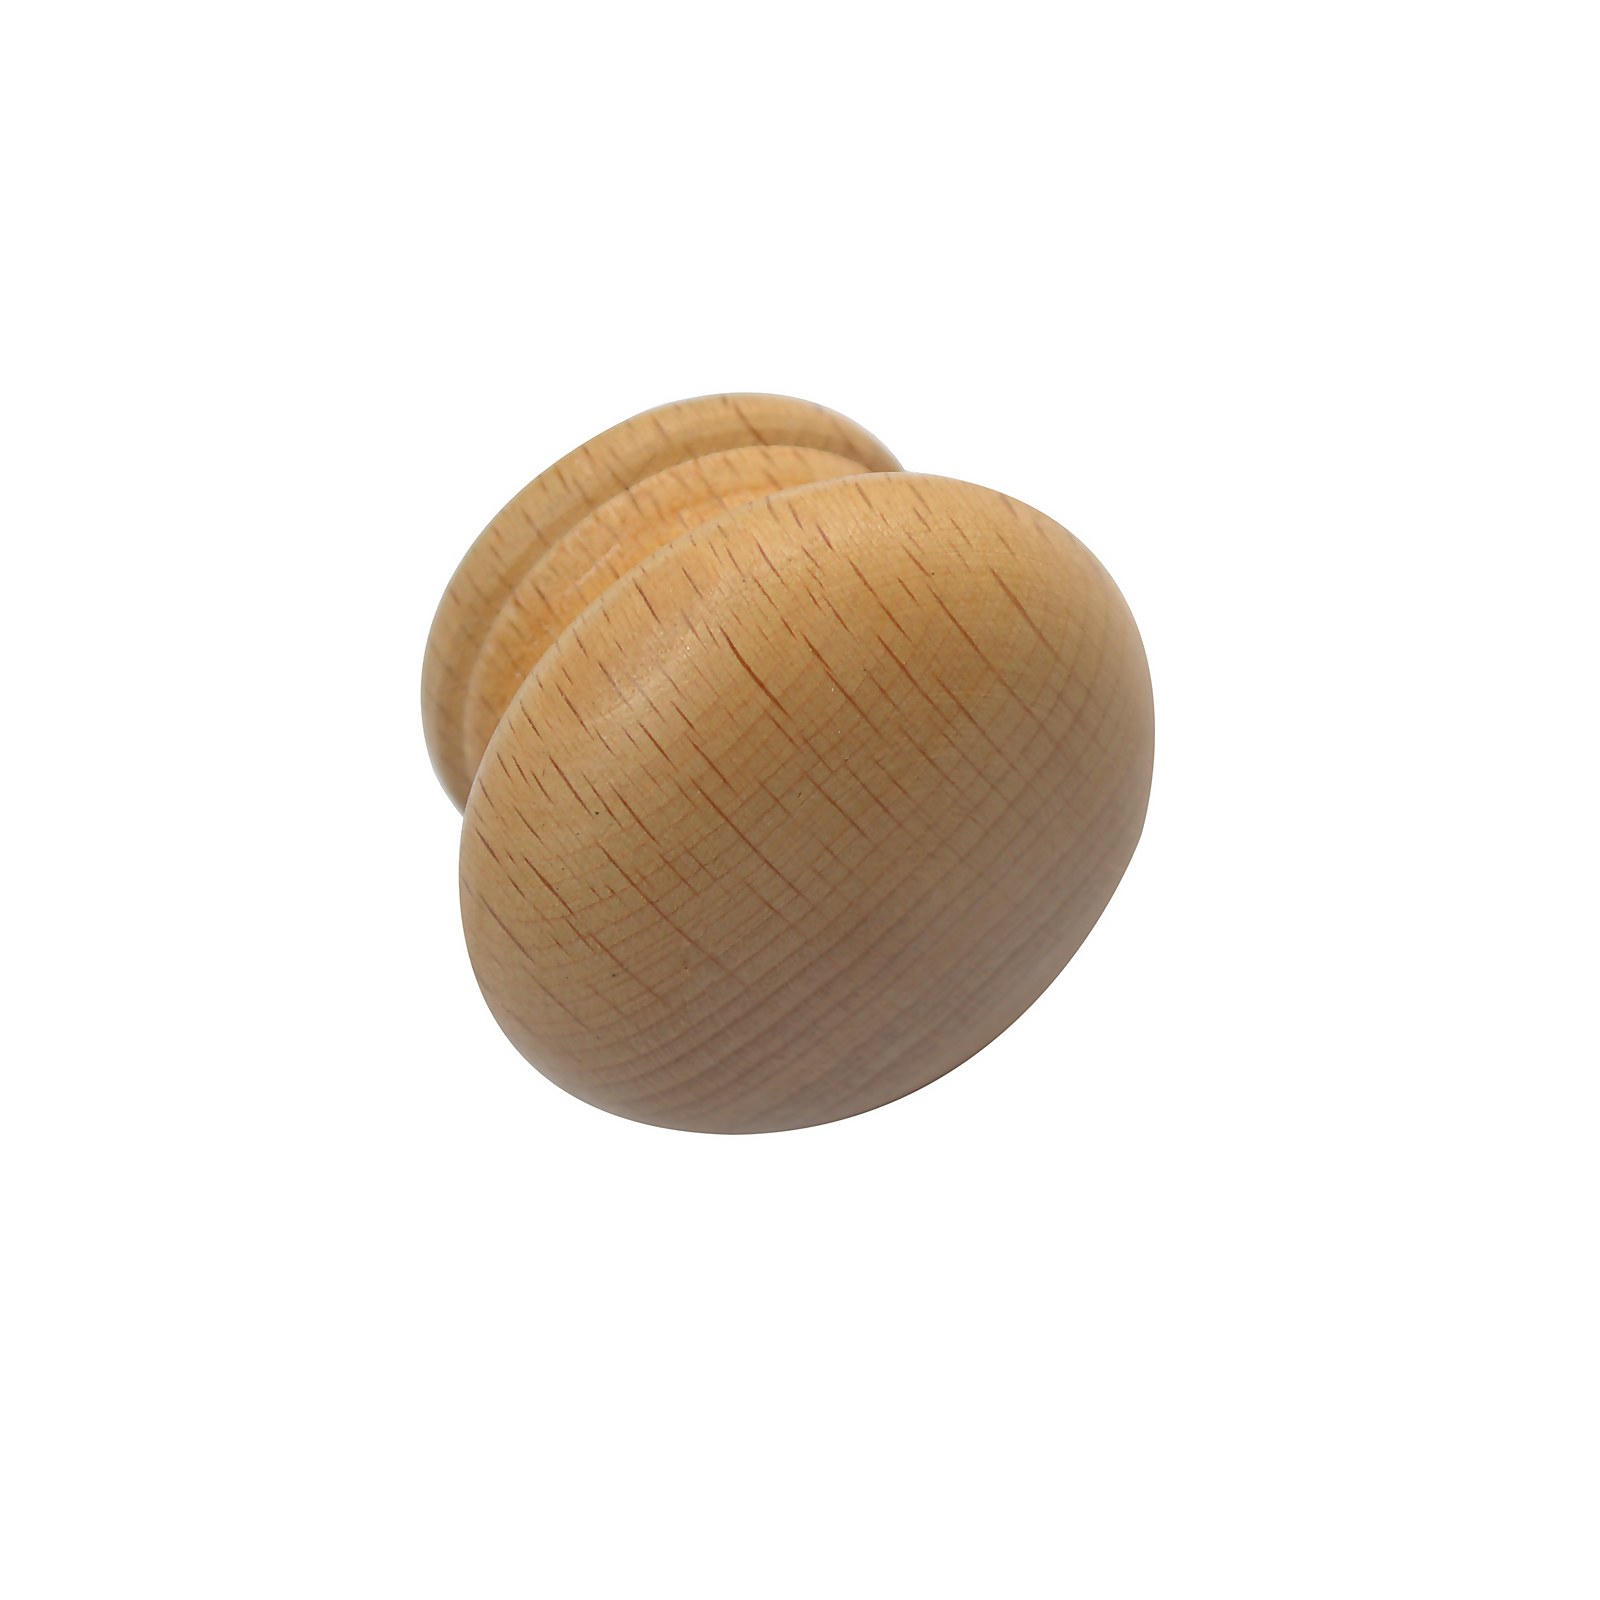 Photo of Beech 30mm Natural Wooden Cabinet Knob - 6 Pack